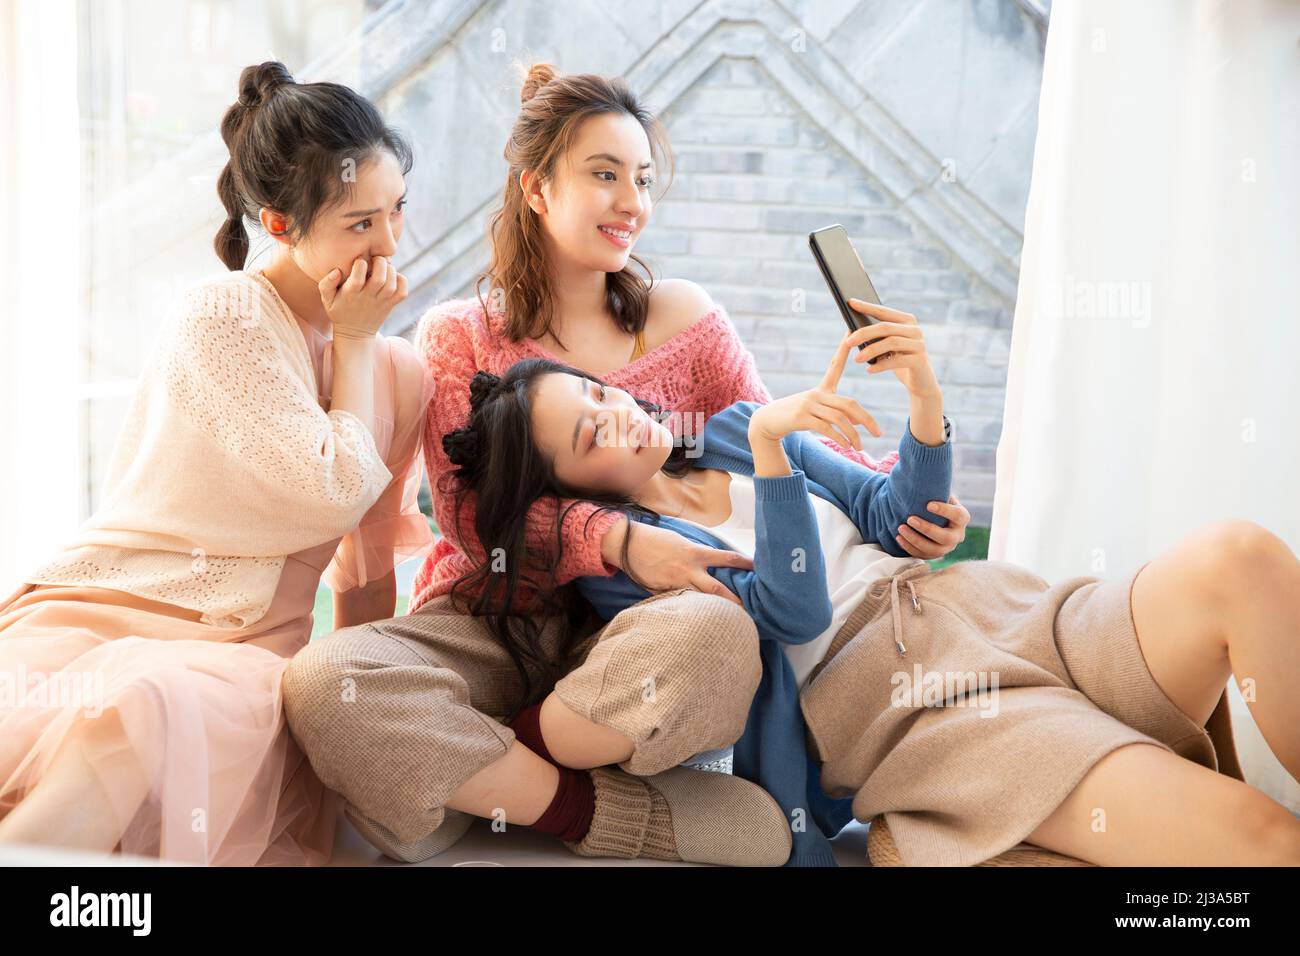 Chinese beautiful young fashionable ladies leisure party, browsing the entertainment consultation in the mobile phone - stock photo Stock Photo